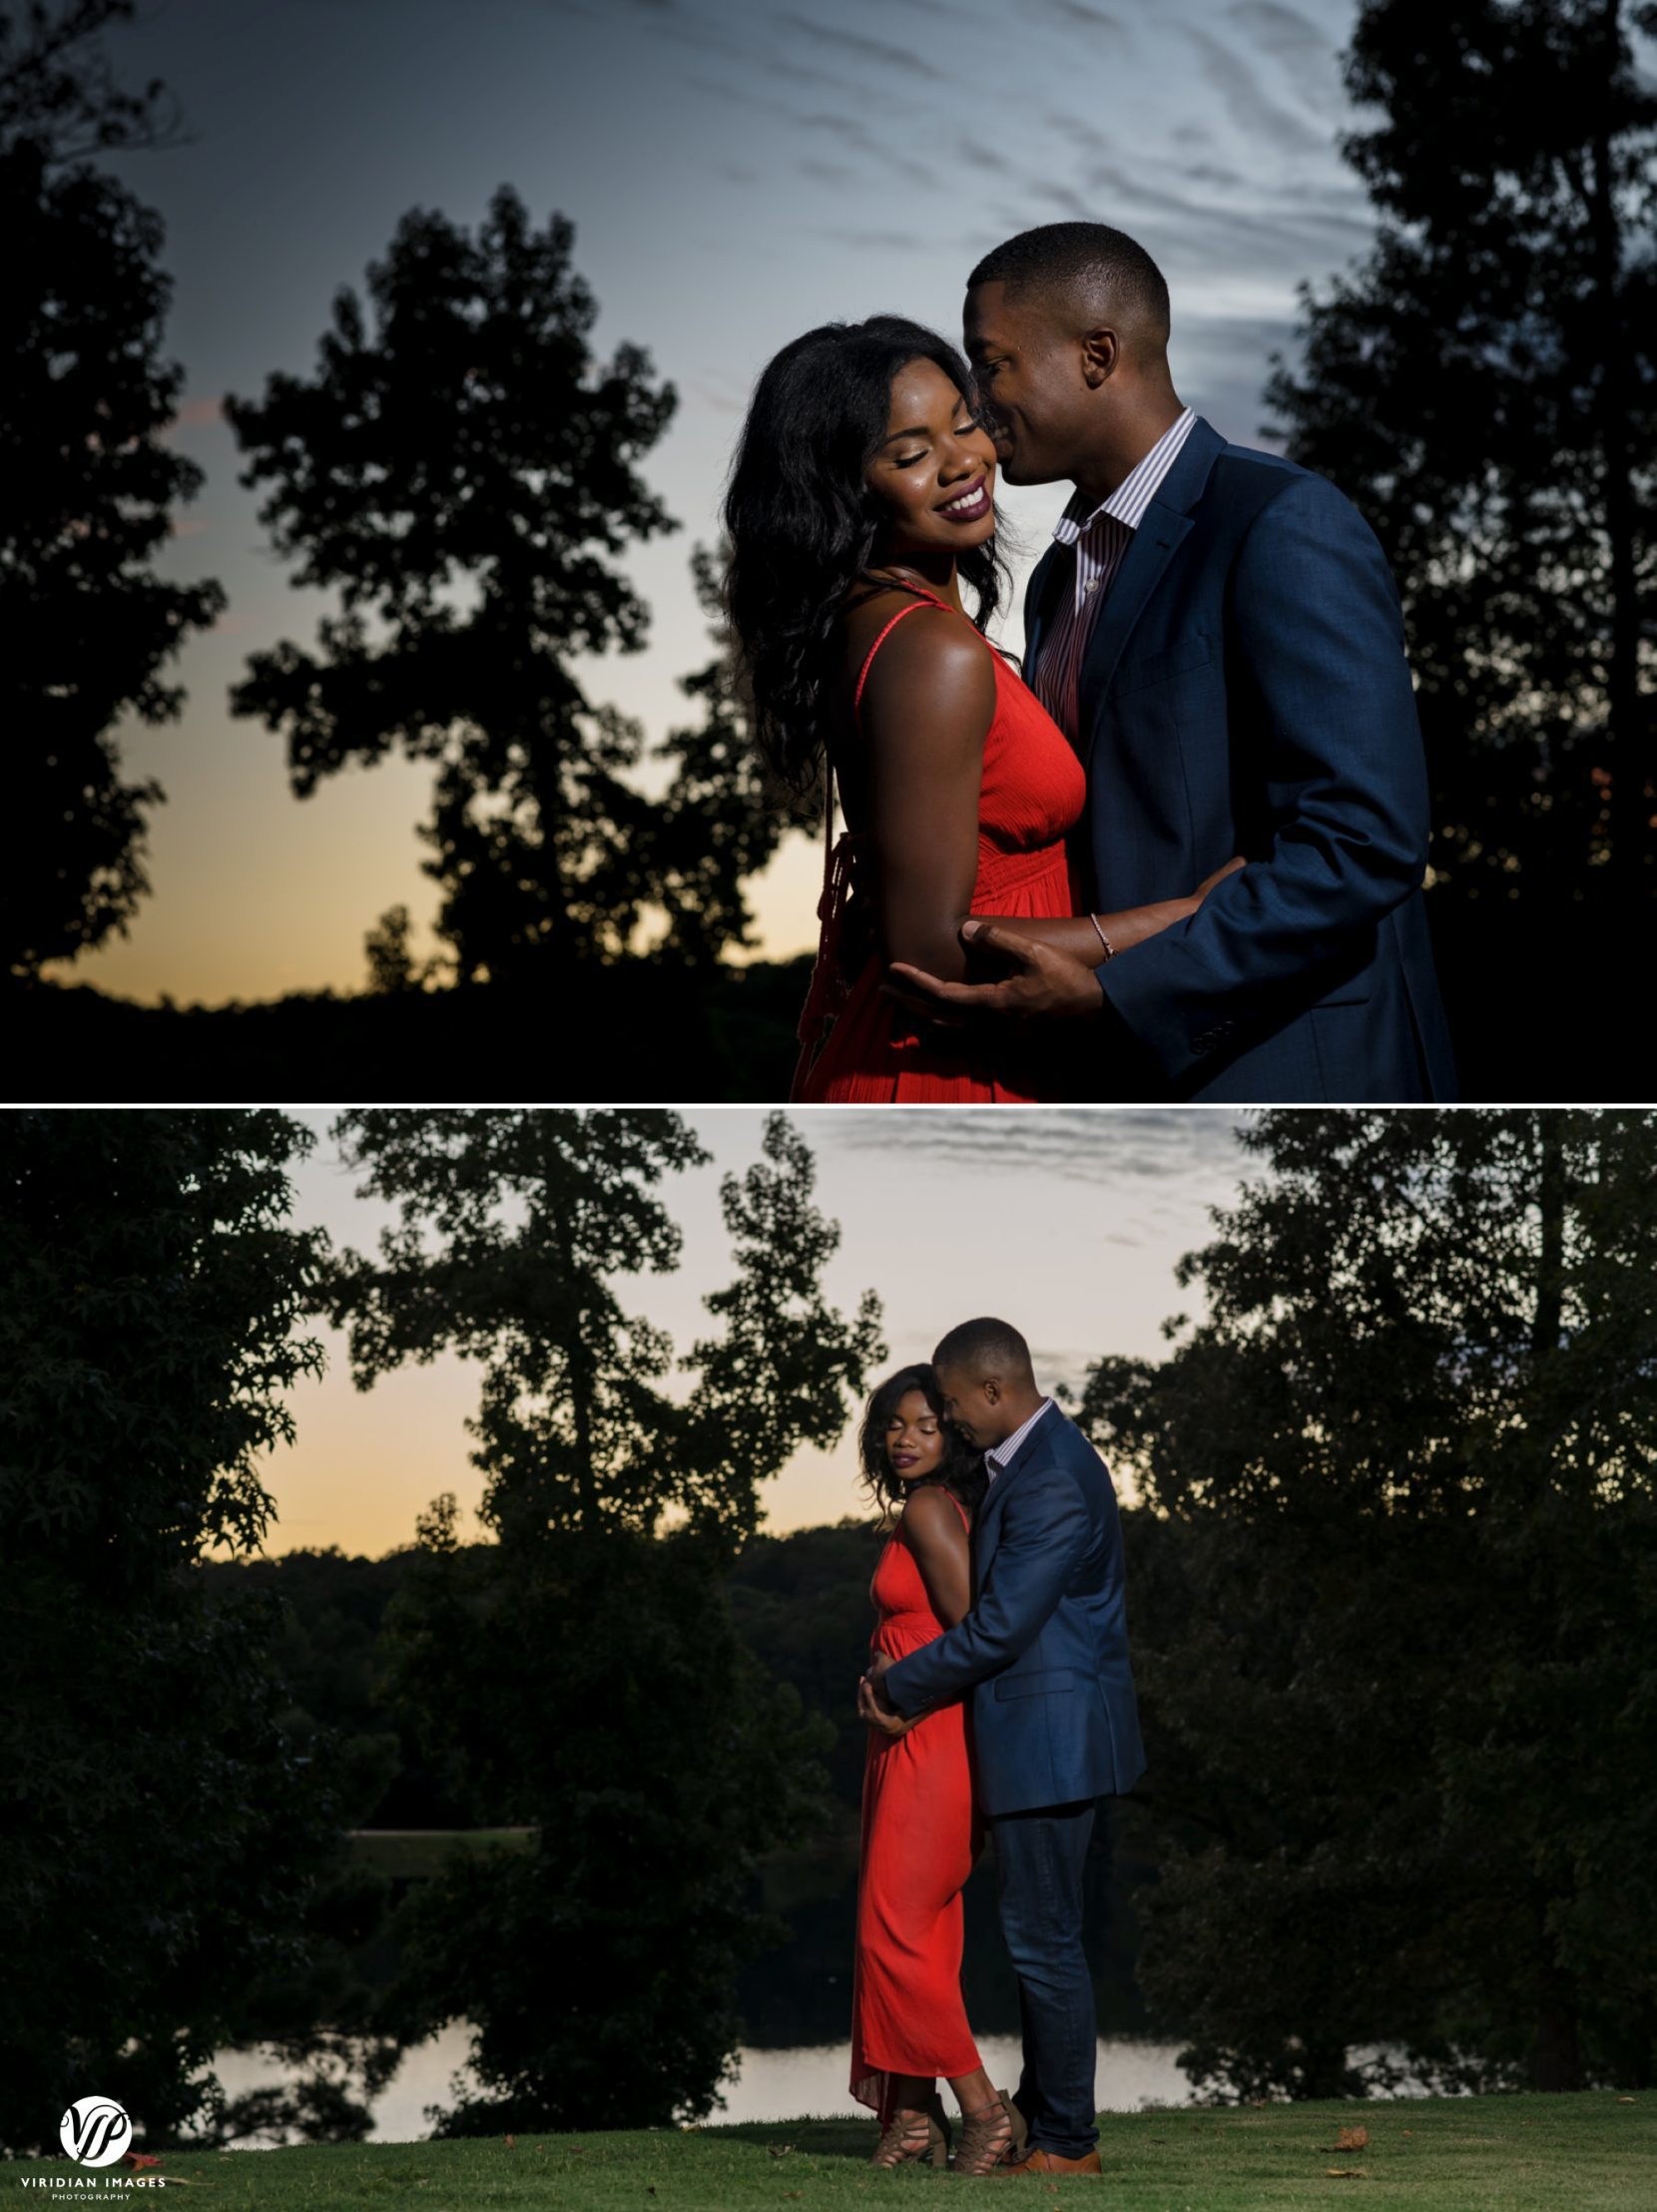 couple smiling while posing during sunset in formal attire